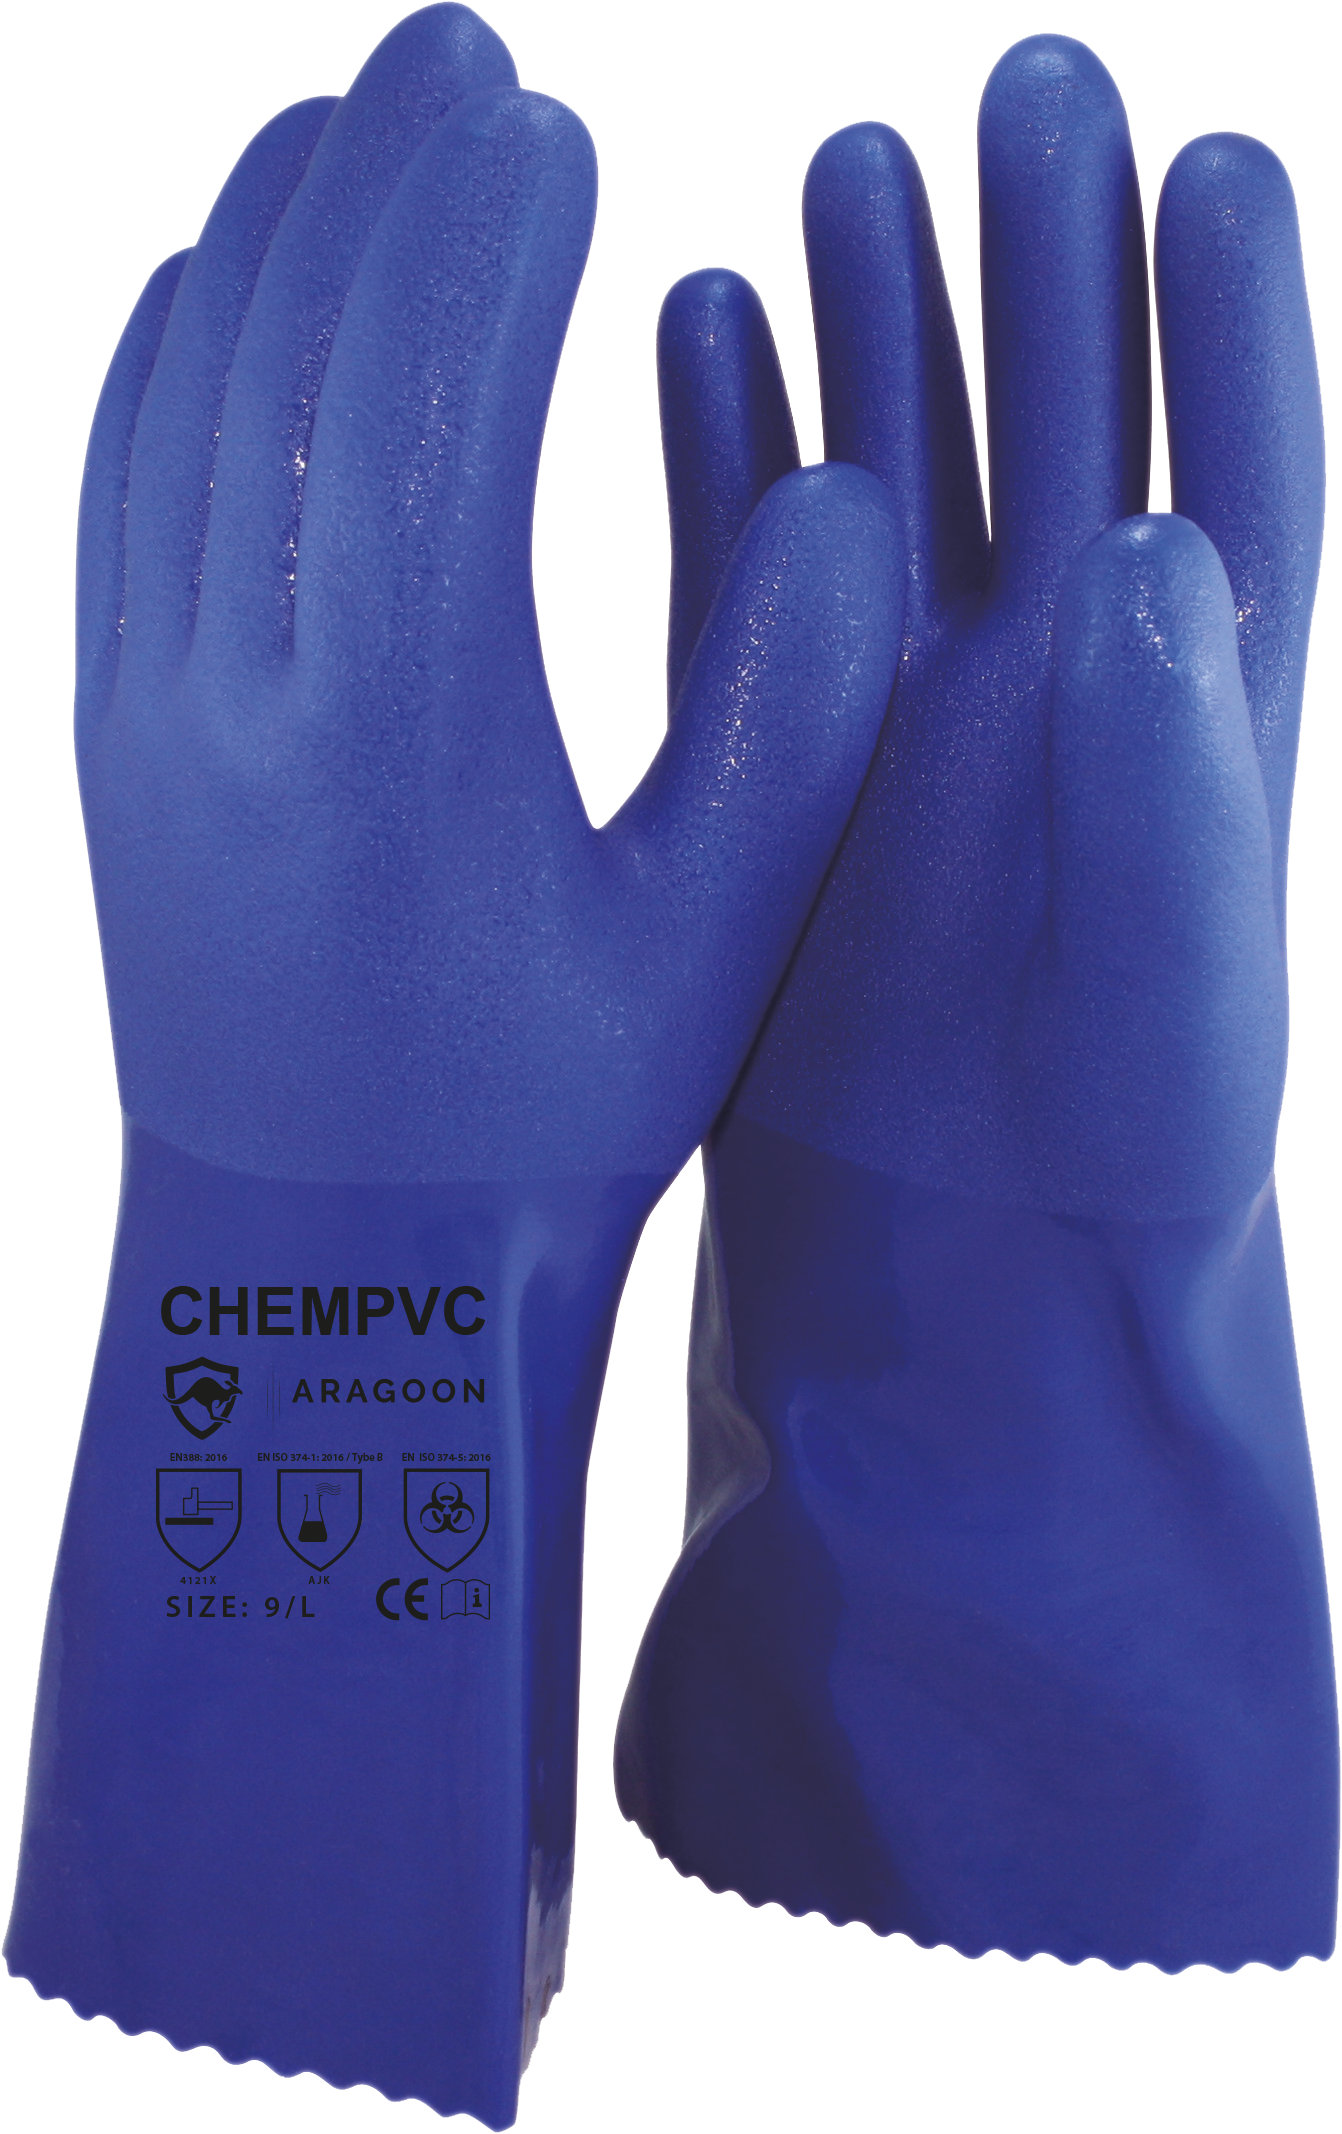 ARAGOON CHEMPVC CHEMICAL AND OIL RESISTANT GLOVES TRIPLE DIPPED PVC GAUNTLET HAND PROTECTION